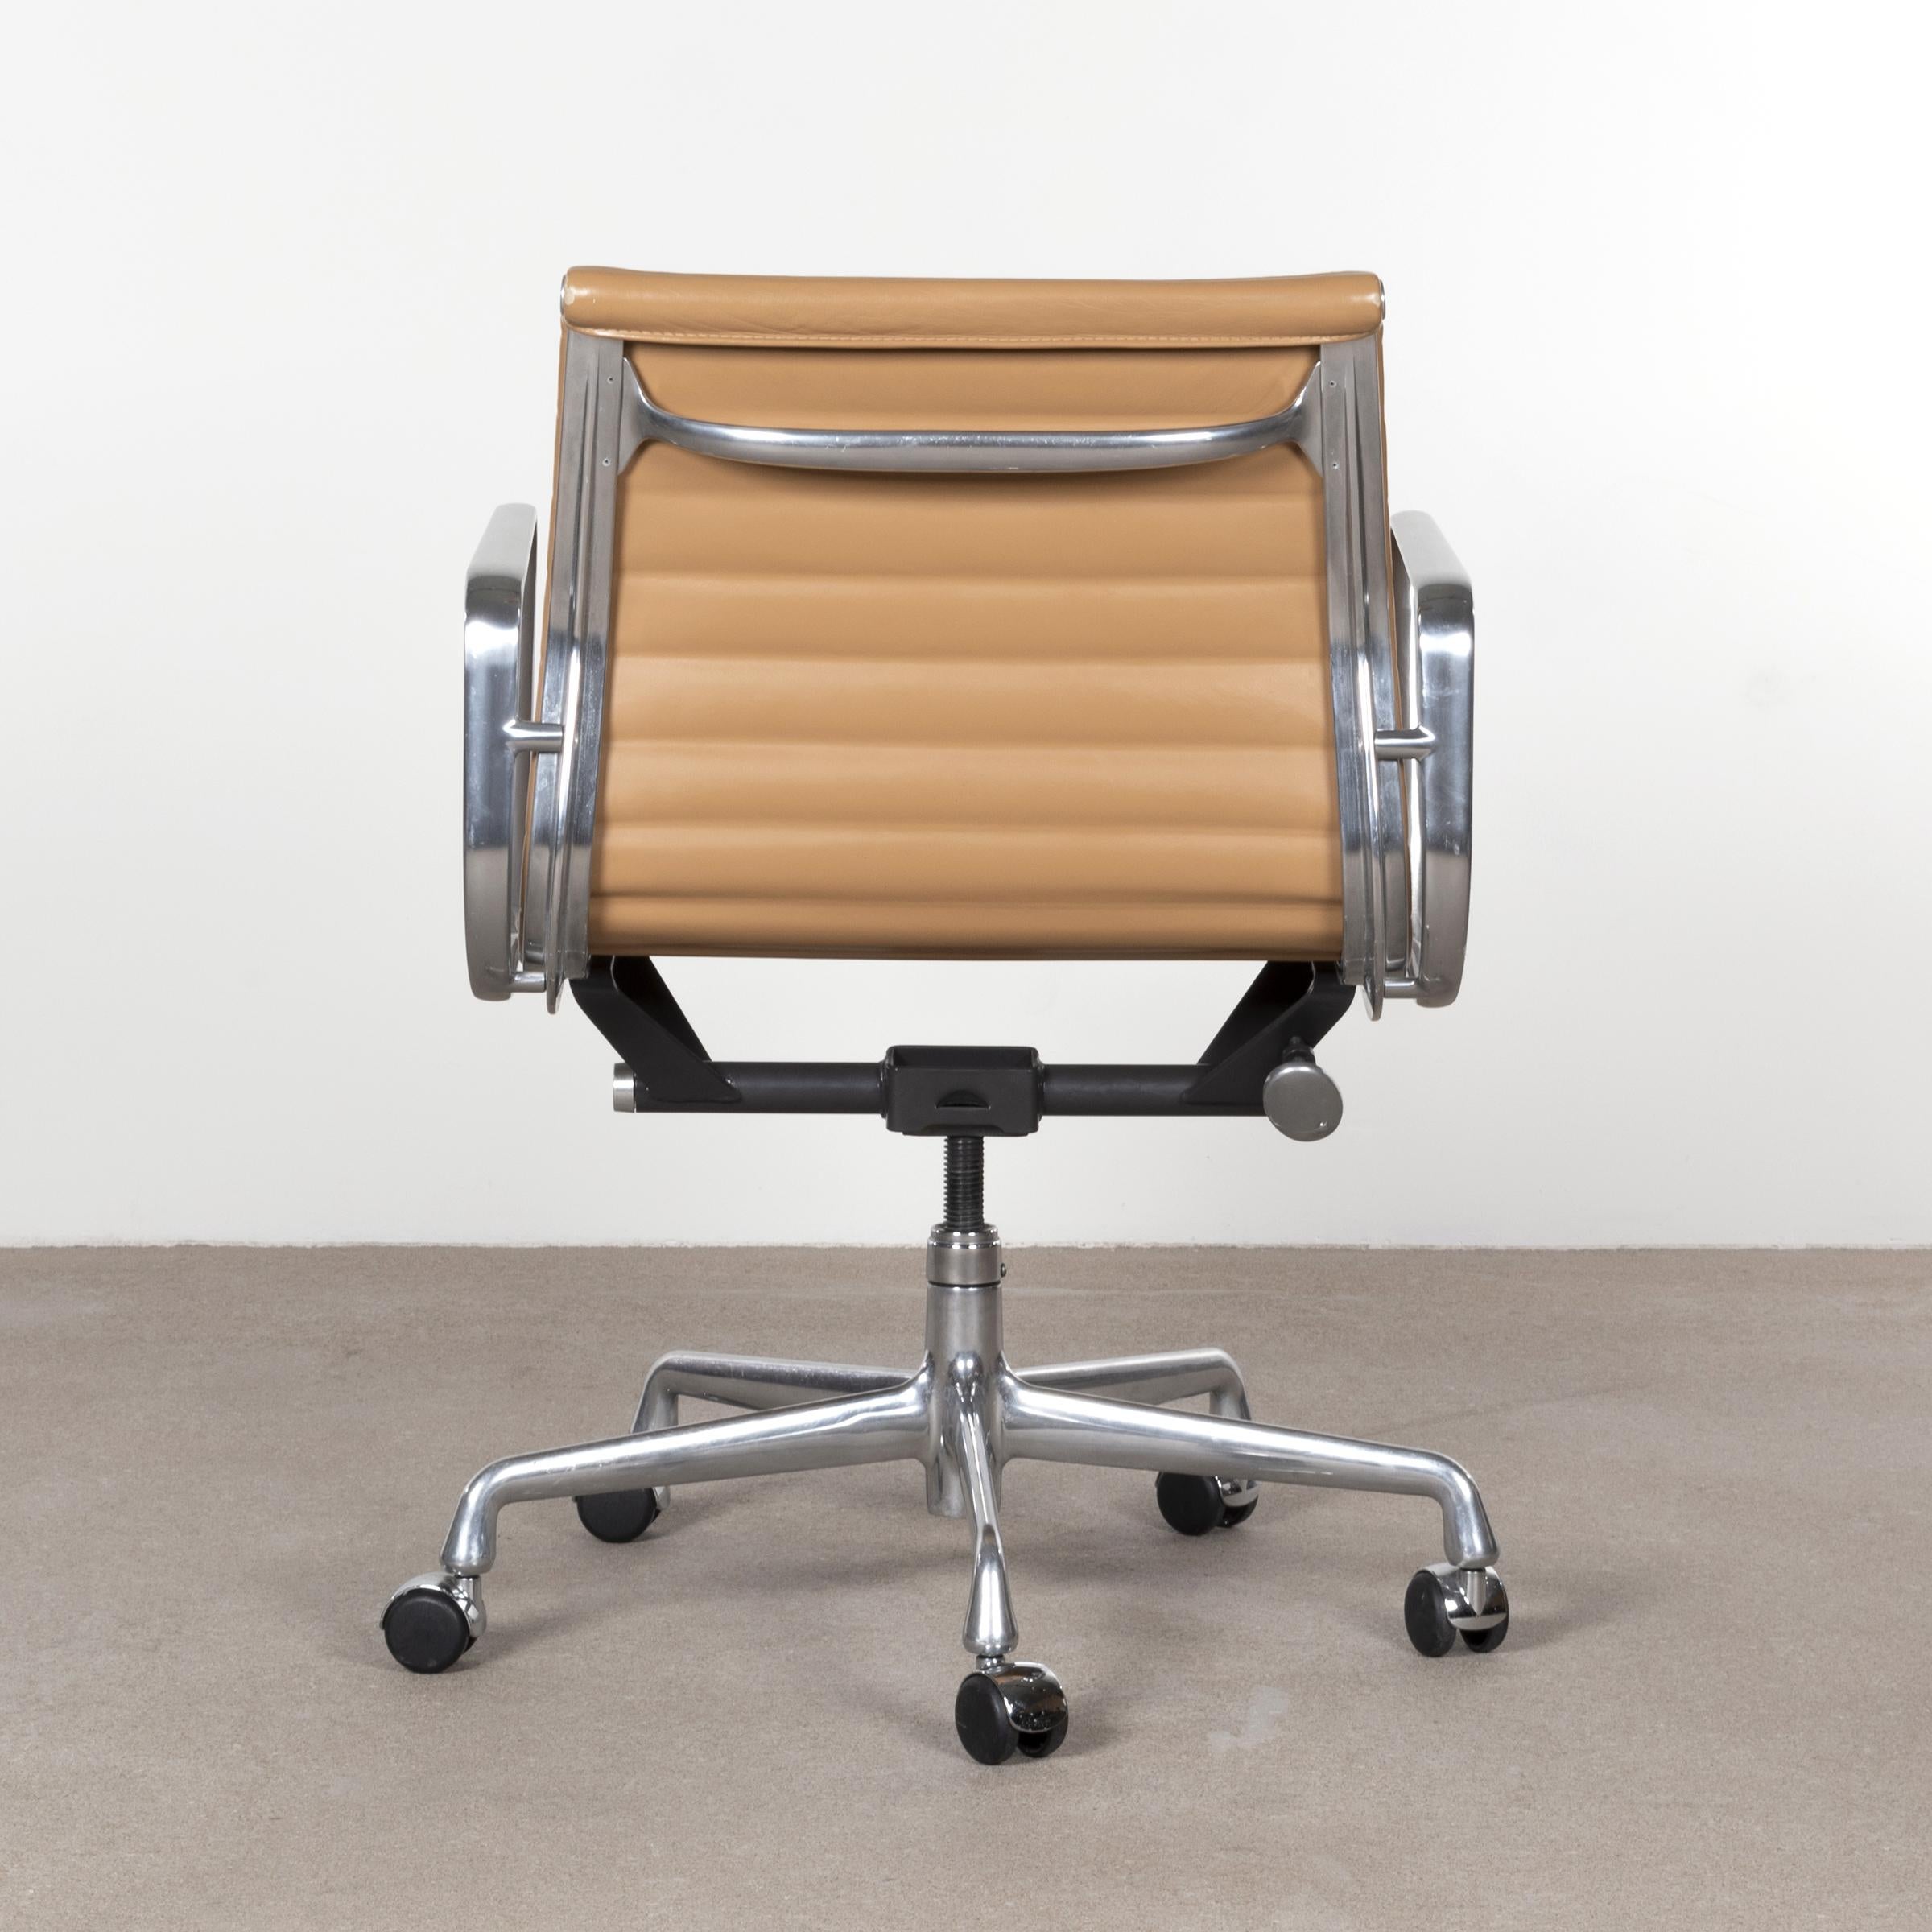 American Eames Management Office Chair in cognac leather for Louise (LA)